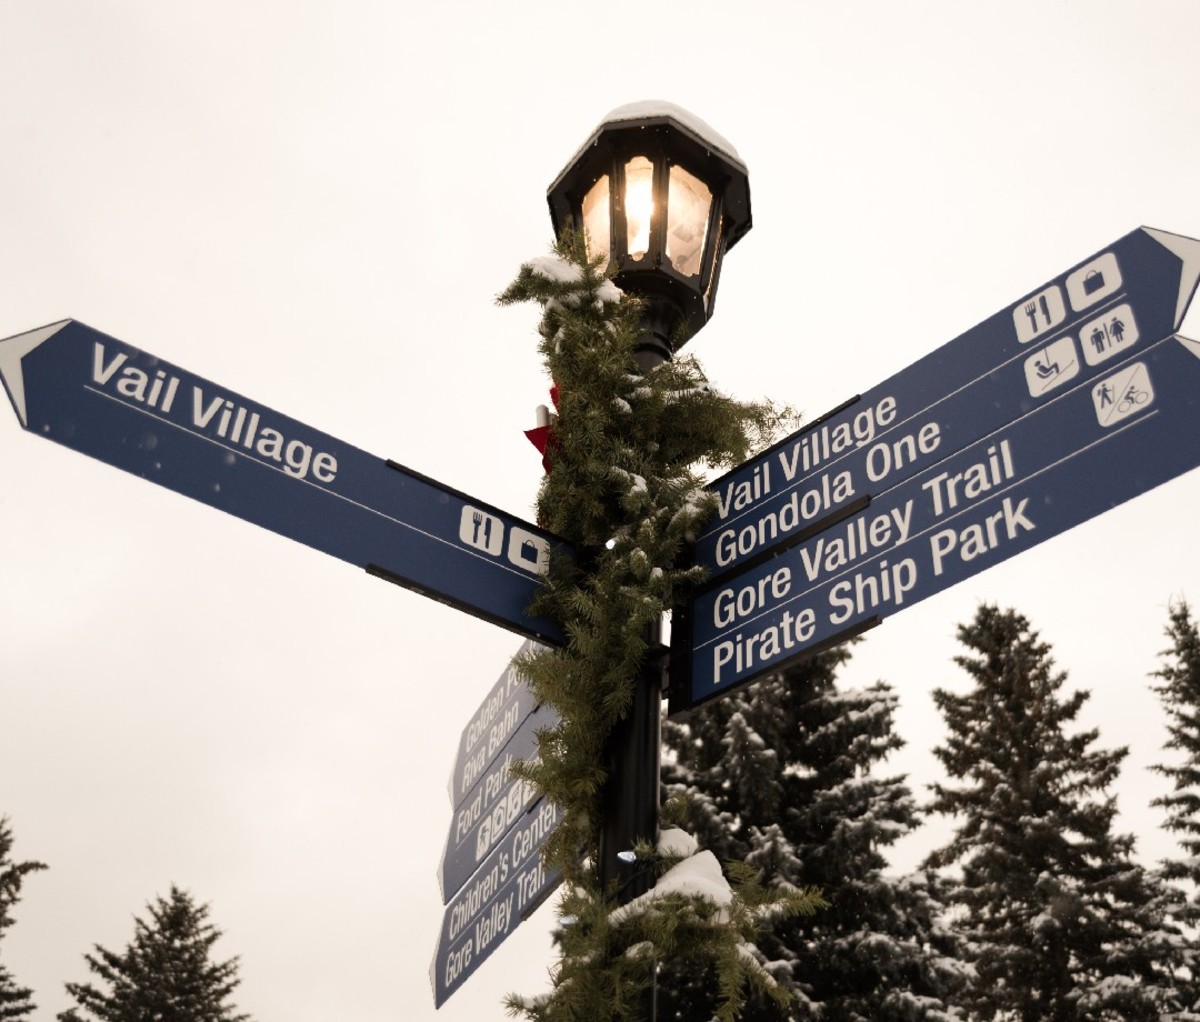 Vail Village lamp post with signs to attractions.